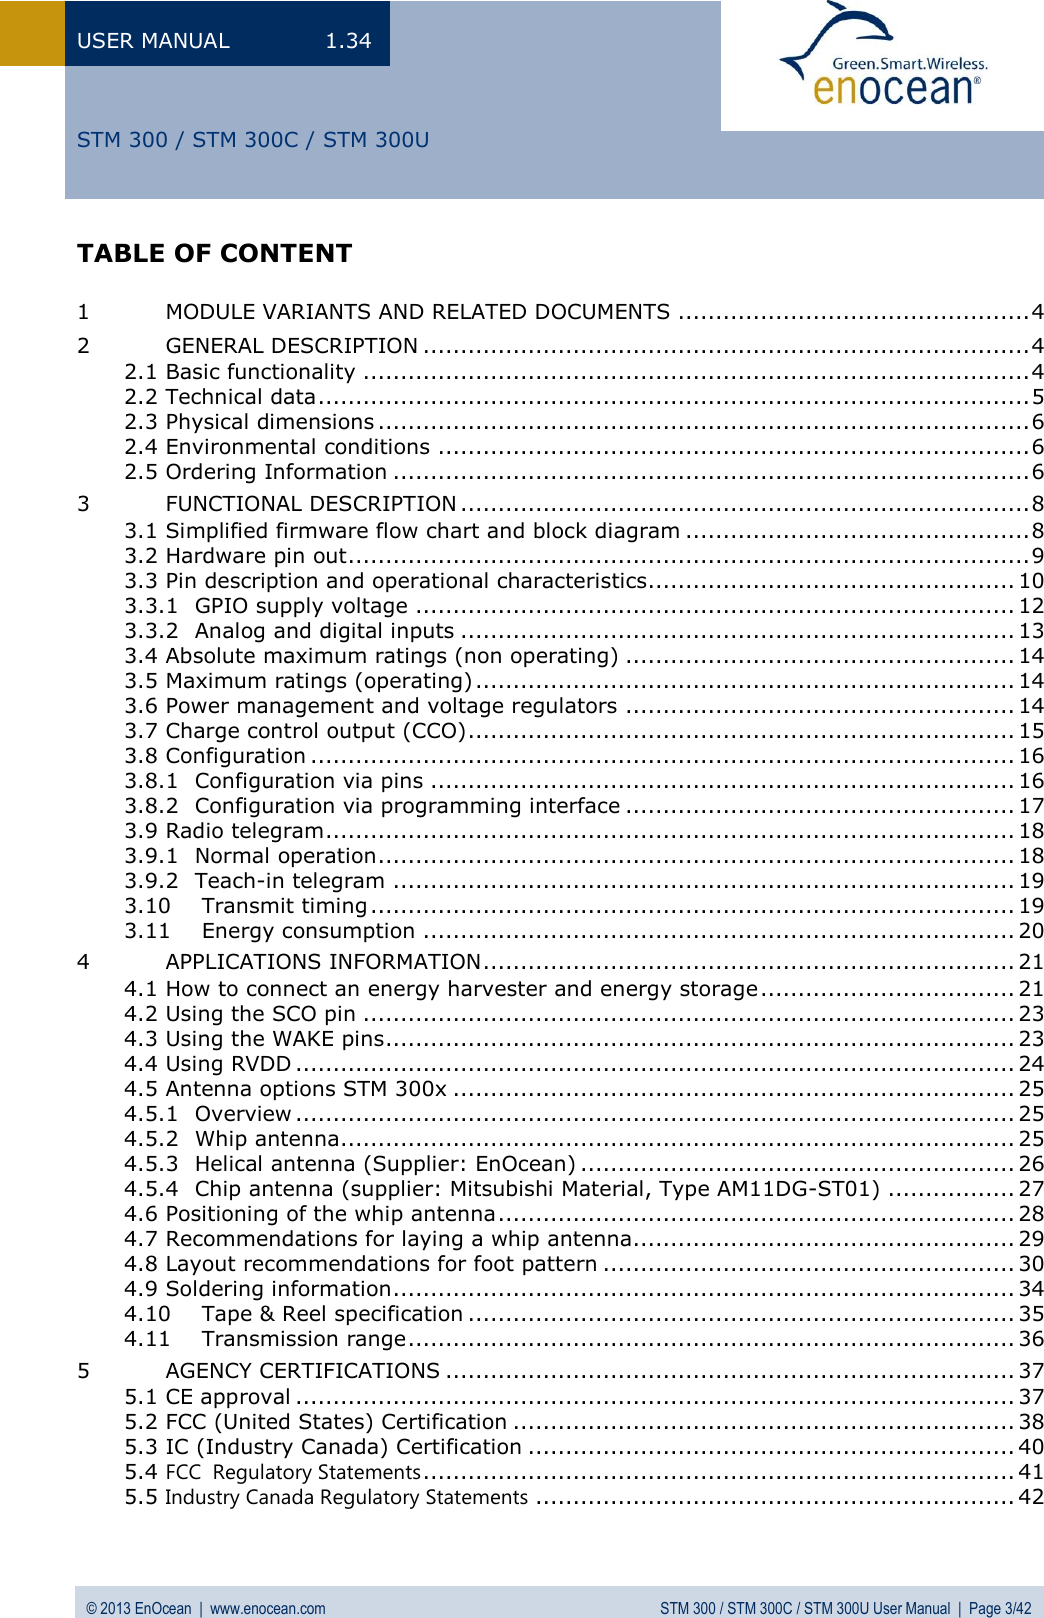 USER MANUAL  1.34 © 2013 EnOcean  |  www.enocean.com  STM 300 / STM 300C / STM 300U User Manual  |  Page 3/42   STM 300 / STM 300C / STM 300U TABLE OF CONTENT  1 MODULE VARIANTS AND RELATED DOCUMENTS ............................................... 4 2 GENERAL DESCRIPTION ................................................................................. 4 2.1 Basic functionality ......................................................................................... 4 2.2 Technical data ............................................................................................... 5 2.3 Physical dimensions ....................................................................................... 6 2.4 Environmental conditions ............................................................................... 6 2.5 Ordering Information ..................................................................................... 6 3 FUNCTIONAL DESCRIPTION ............................................................................ 8 3.1 Simplified firmware flow chart and block diagram .............................................. 8 3.2 Hardware pin out ........................................................................................... 9 3.3 Pin description and operational characteristics ................................................. 10 3.3.1 GPIO supply voltage ................................................................................ 12 3.3.2 Analog and digital inputs .......................................................................... 13 3.4 Absolute maximum ratings (non operating) .................................................... 14 3.5 Maximum ratings (operating) ........................................................................ 14 3.6 Power management and voltage regulators .................................................... 14 3.7 Charge control output (CCO) ......................................................................... 15 3.8 Configuration .............................................................................................. 16 3.8.1 Configuration via pins .............................................................................. 16 3.8.2 Configuration via programming interface .................................................... 17 3.9 Radio telegram ............................................................................................ 18 3.9.1 Normal operation ..................................................................................... 18 3.9.2 Teach-in telegram ................................................................................... 19 3.10 Transmit timing ...................................................................................... 19 3.11 Energy consumption ............................................................................... 20 4 APPLICATIONS INFORMATION ....................................................................... 21 4.1 How to connect an energy harvester and energy storage .................................. 21 4.2 Using the SCO pin ....................................................................................... 23 4.3 Using the WAKE pins .................................................................................... 23 4.4 Using RVDD ................................................................................................ 24 4.5 Antenna options STM 300x ........................................................................... 25 4.5.1 Overview ................................................................................................ 25 4.5.2 Whip antenna .......................................................................................... 25 4.5.3 Helical antenna (Supplier: EnOcean) .......................................................... 26 4.5.4 Chip antenna (supplier: Mitsubishi Material, Type AM11DG-ST01) ................. 27 4.6 Positioning of the whip antenna ..................................................................... 28 4.7 Recommendations for laying a whip antenna................................................... 29 4.8 Layout recommendations for foot pattern ....................................................... 30 4.9 Soldering information ................................................................................... 34 4.10 Tape &amp; Reel specification ......................................................................... 35 4.11 Transmission range ................................................................................. 36 5 AGENCY CERTIFICATIONS ............................................................................ 37 5.1 CE approval ................................................................................................ 37 5.2 FCC (United States) Certification ................................................................... 38 5.3 IC (Industry Canada) Certification ................................................................. 40 5.4 FCC  Regulatory Statements ............................................................................... 41 5.5 Industry Canada Regulatory Statements ................................................................ 42  